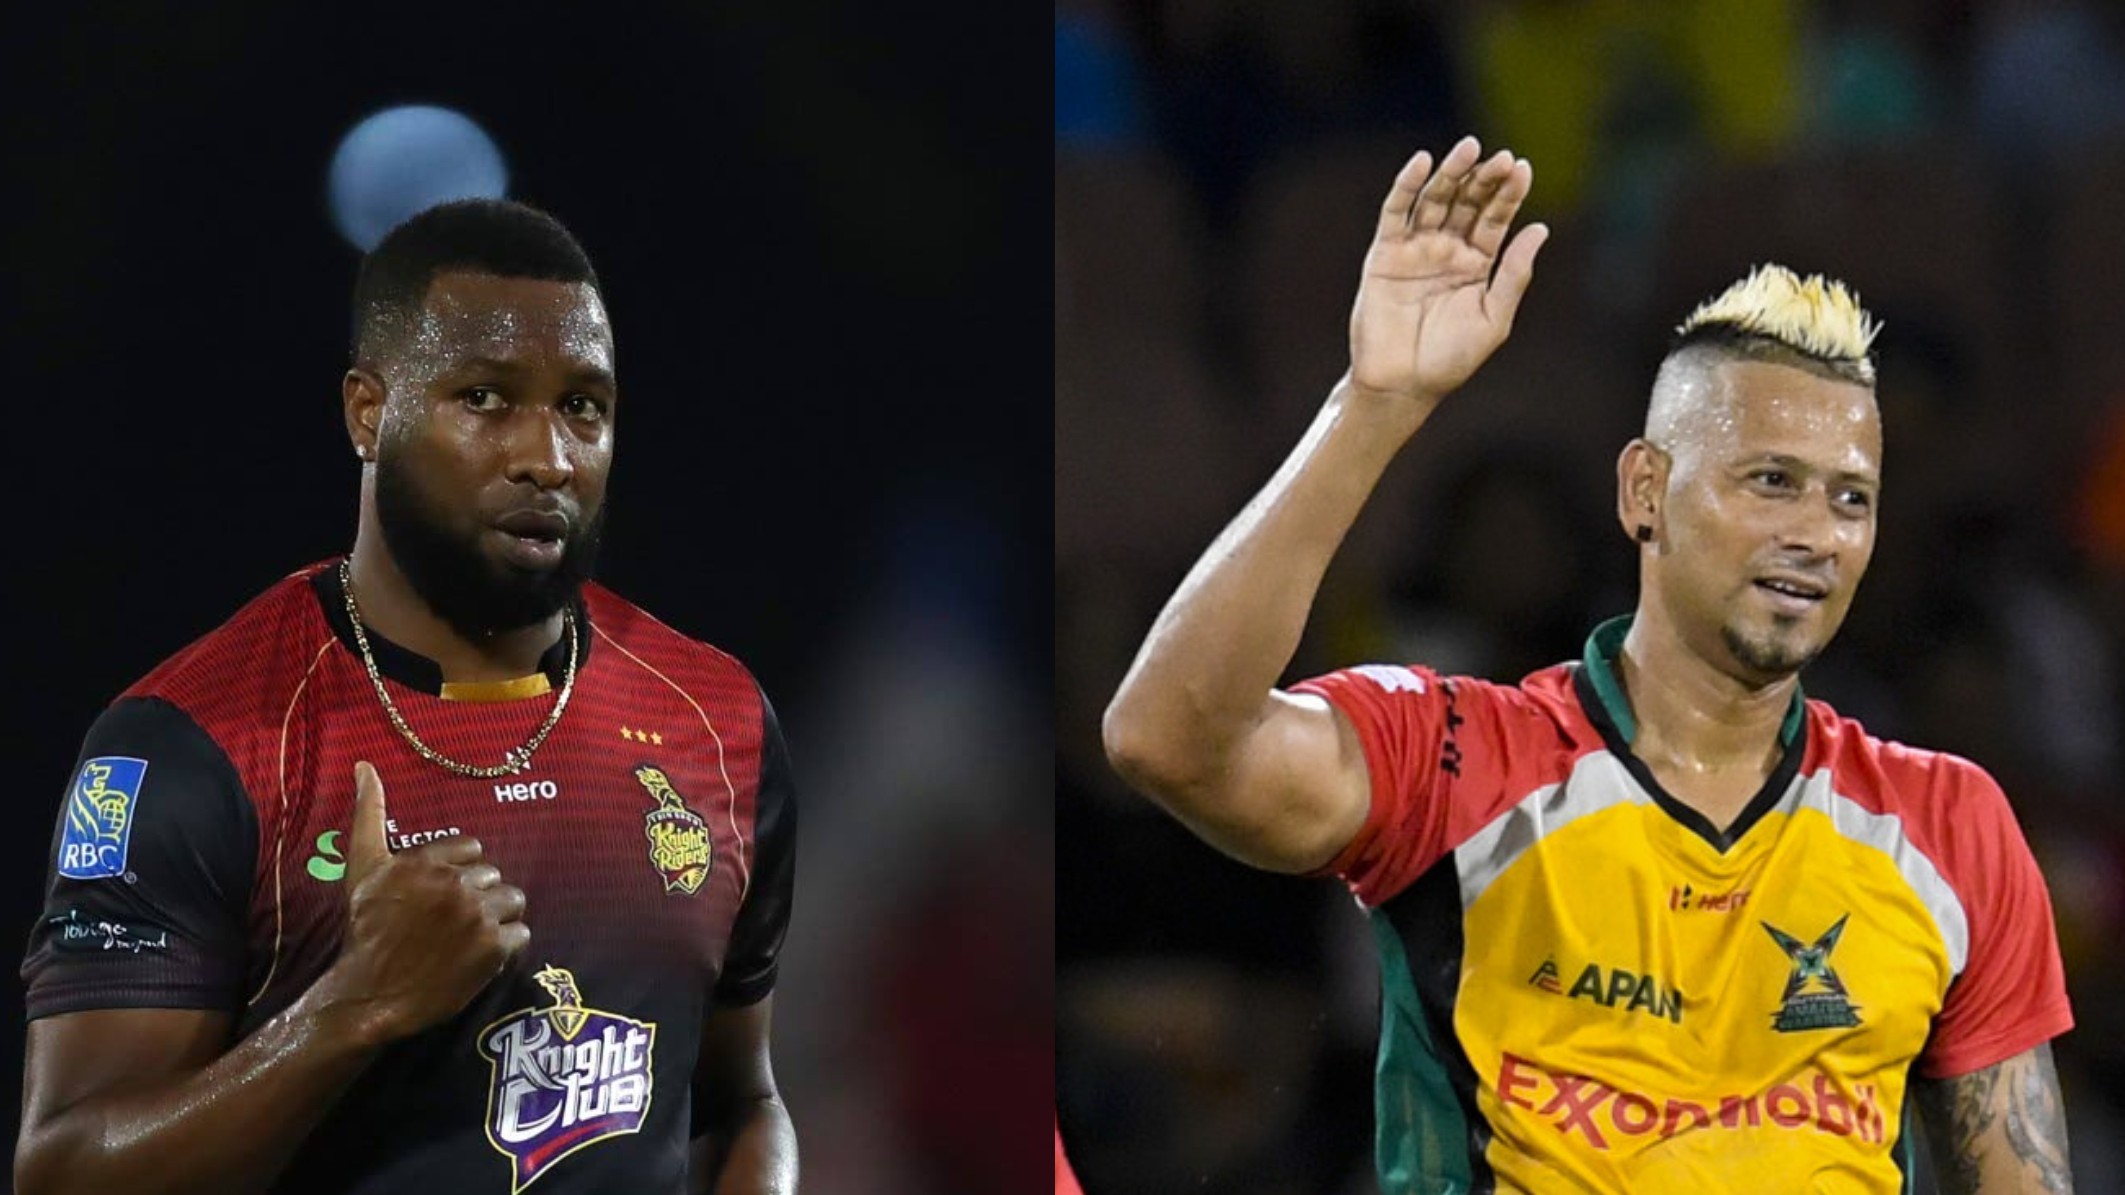 CPL 2020: Match 29, St Kitts and Nevis Patriots v Trinbago Knight Riders – Fantasy Cricket Tips, Playing XIs, Pitch and Weather